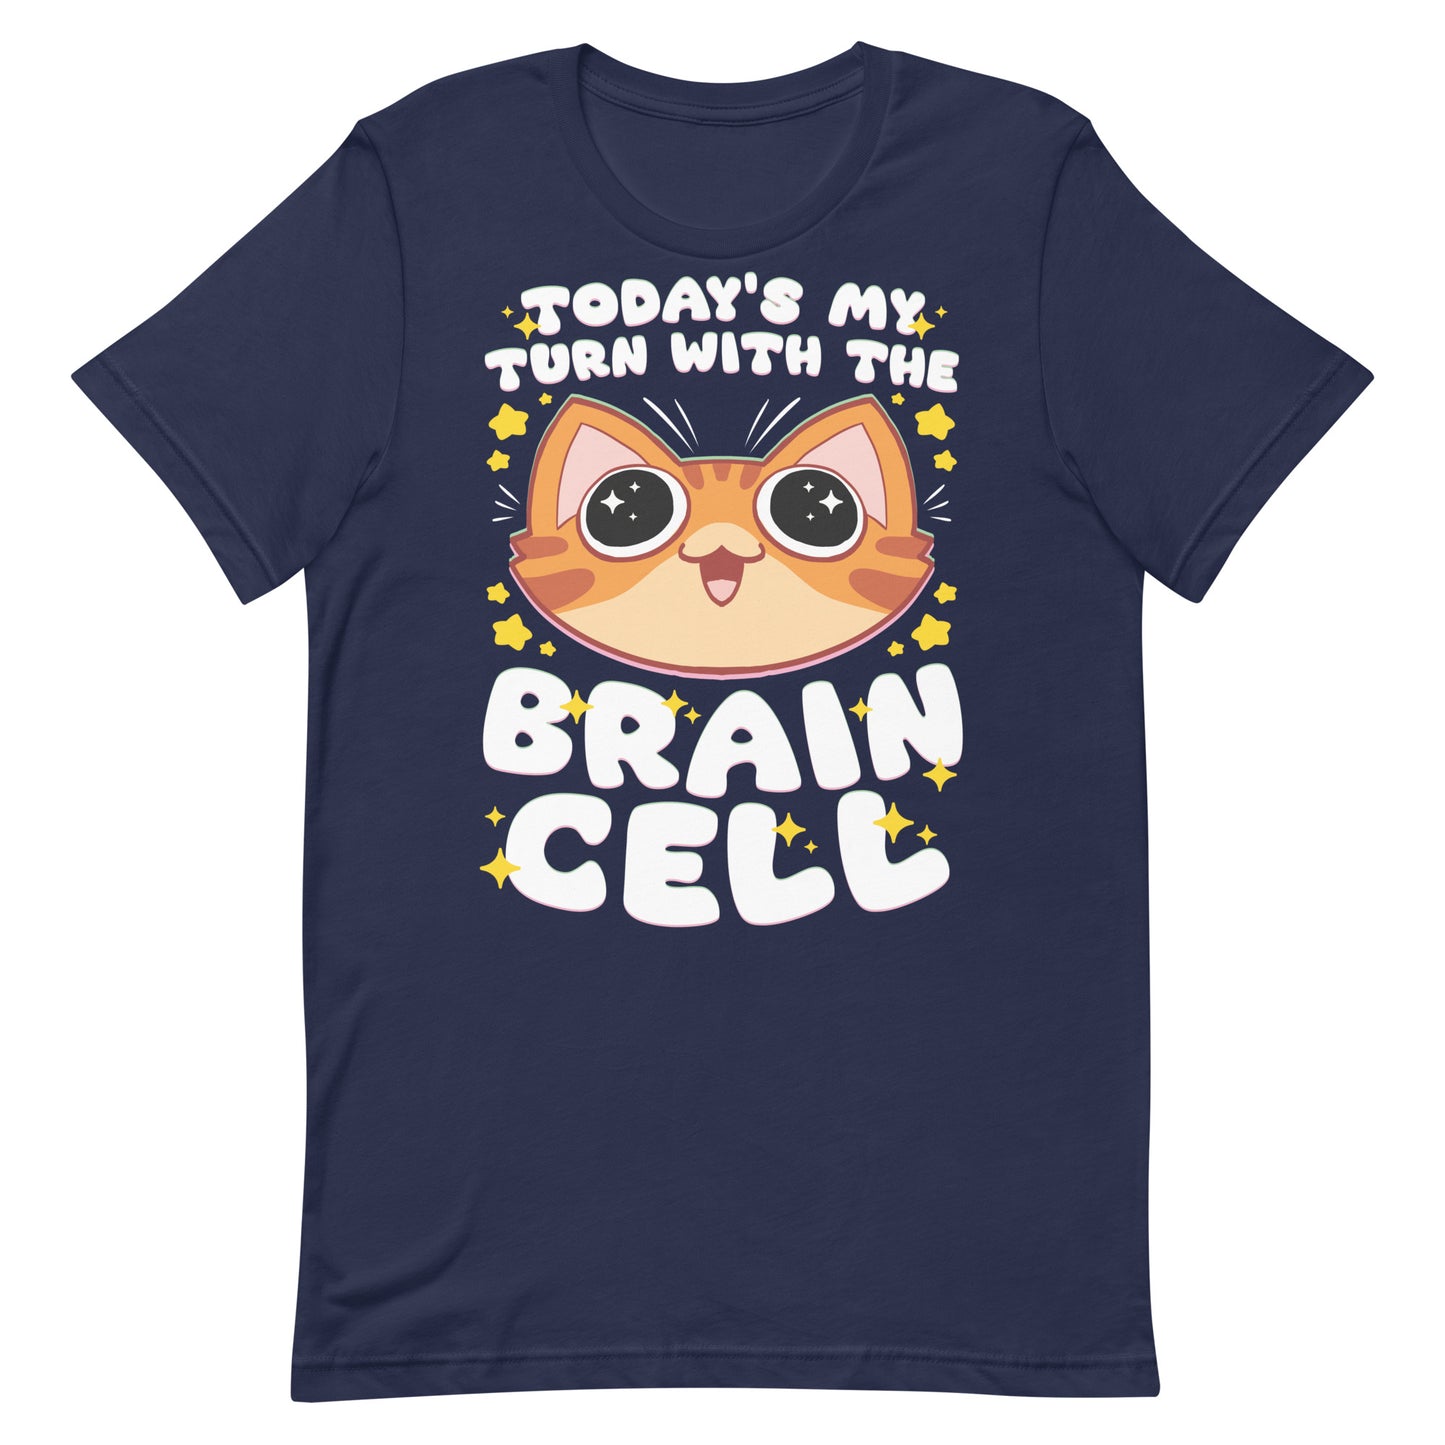 Today's My Turn With The Brain Cell Unisex T-Shirt by The Shirt Hoard